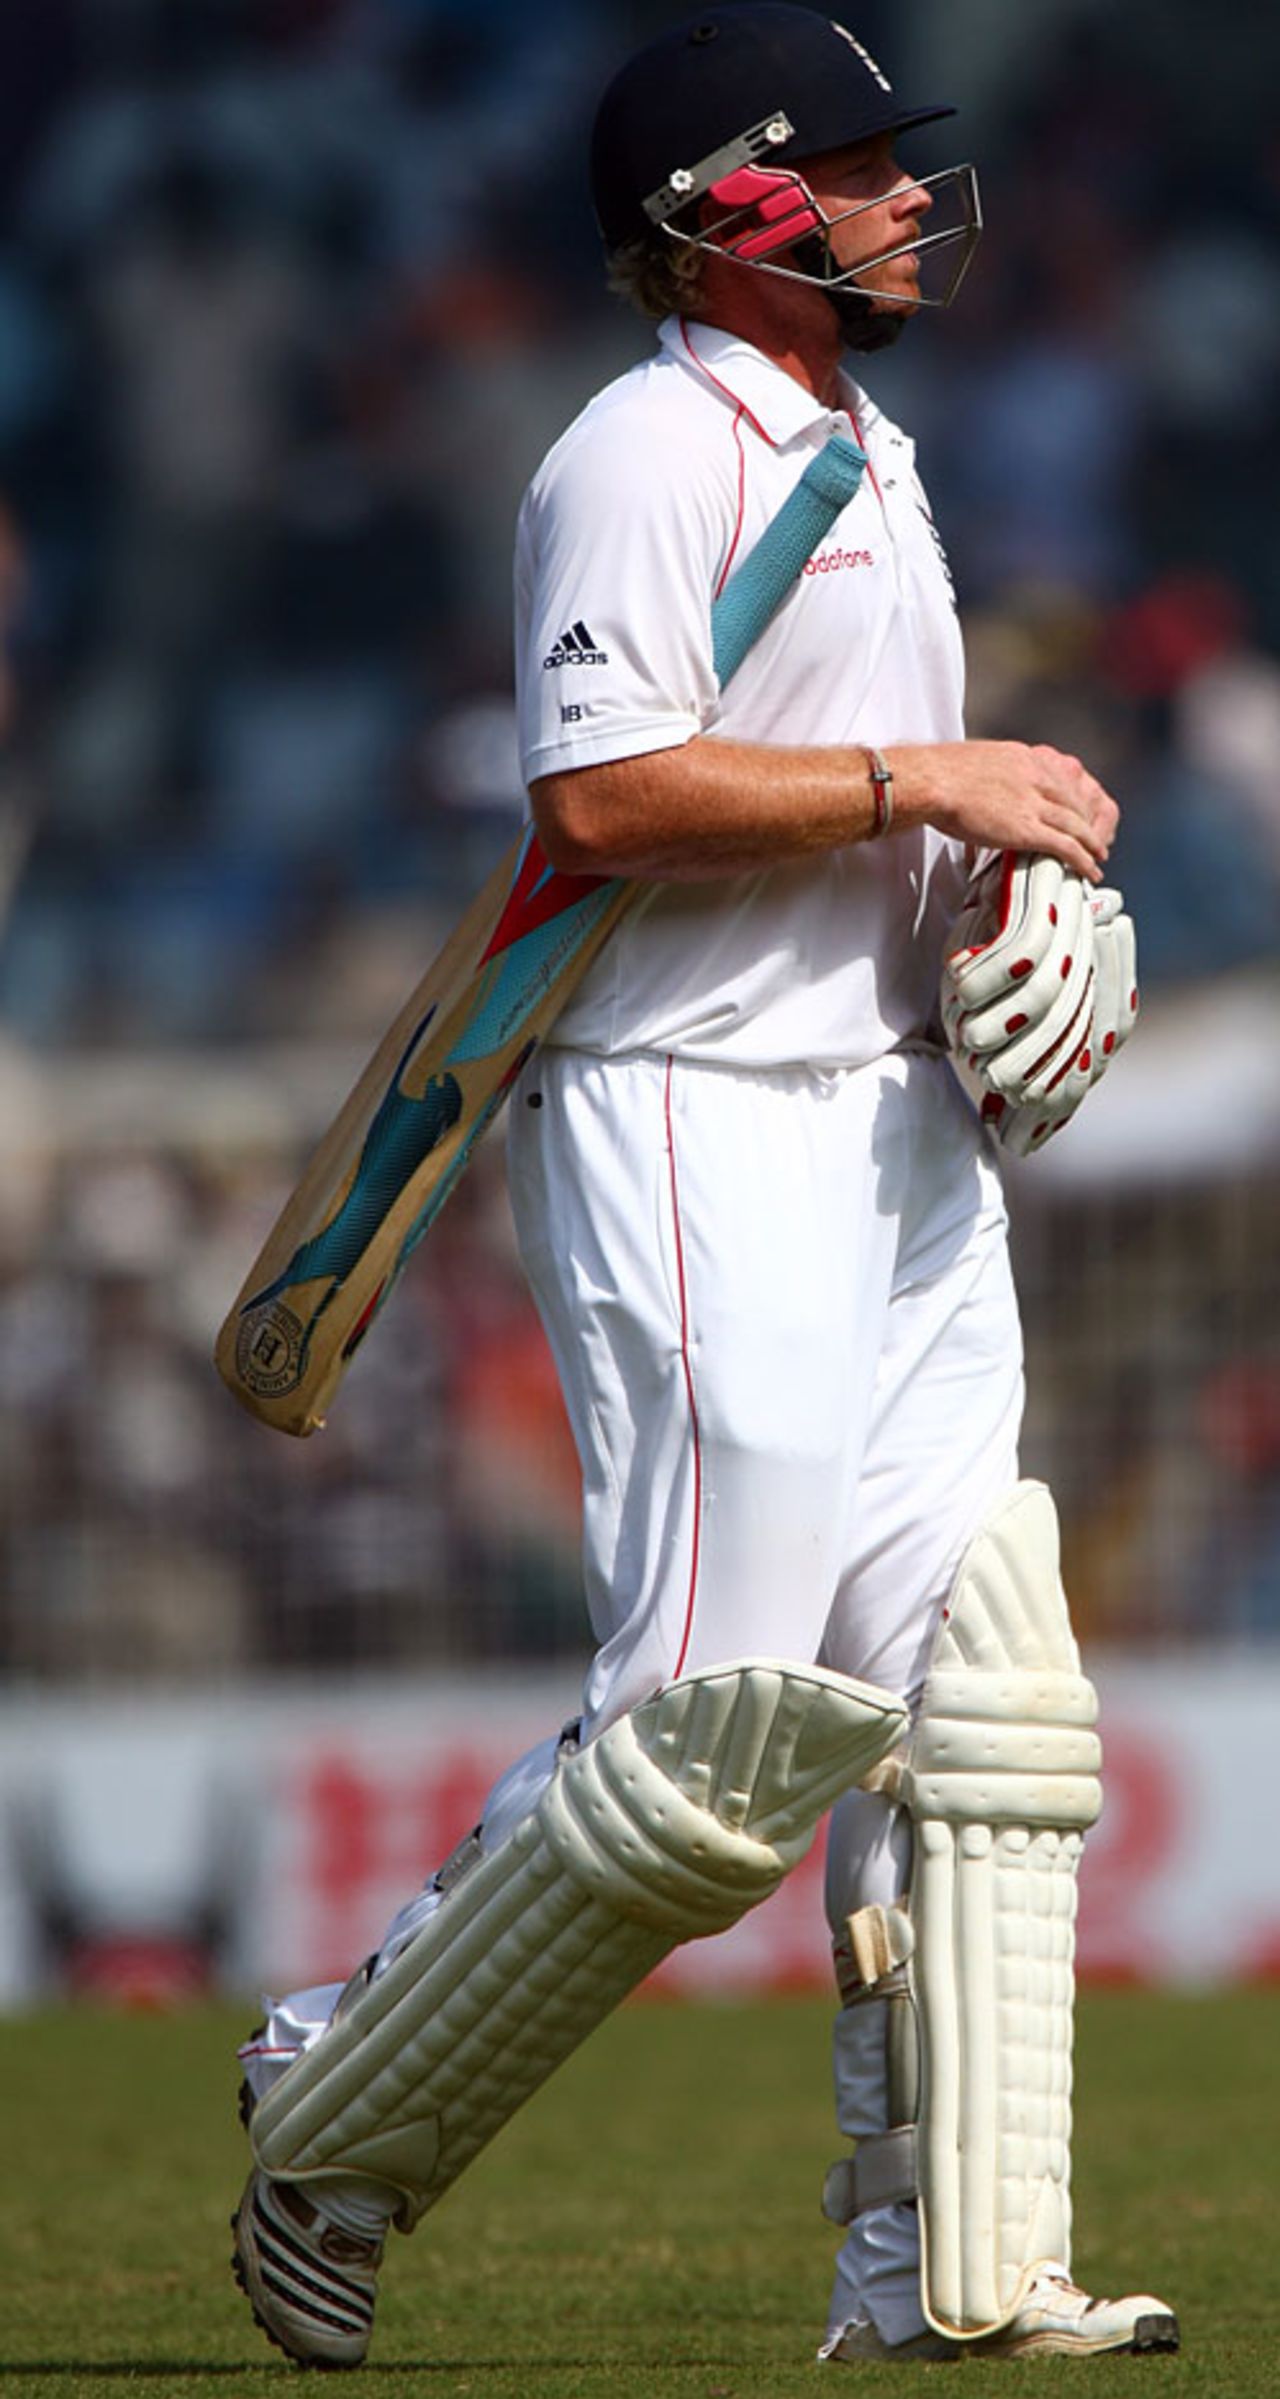 Ian Bell heads back after being caught off Amit Mishra for 7, India v England, 1st Test, Chennai, 3rd day, December 13, 2008